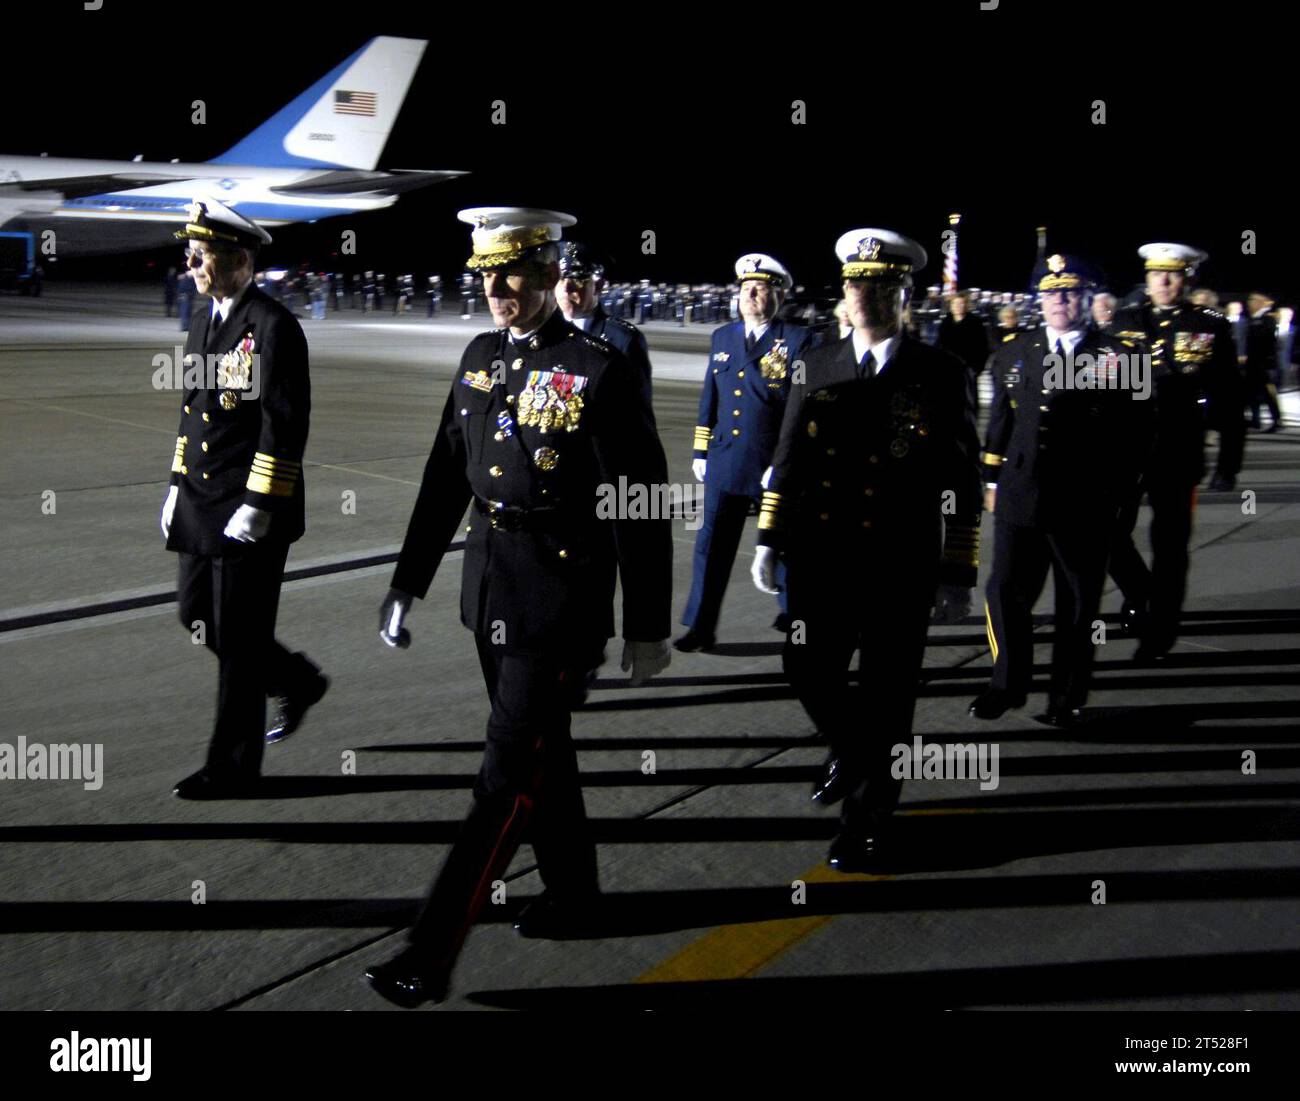 0612300193C-008 Washington, D.C. (Dec. 30, 2006) Р The Chairman of the Joint Chiefs of Staff, Gen. Peter Pace, and the Joint Chiefs of Staff walk to their vehicles to continue the ceremony for former U.S. President Gerald Ford at Andrews Air Force Base, Md., Dec. 30, 2006. Ford died at his home in Rancho Mirage, California, Dec. 26 at the age of 93.  A private interment service is scheduled for Jan. 3 at the Gerald R. Ford Presidential museum in Grand Rapids, Mich. Dept. of Defense Stock Photo